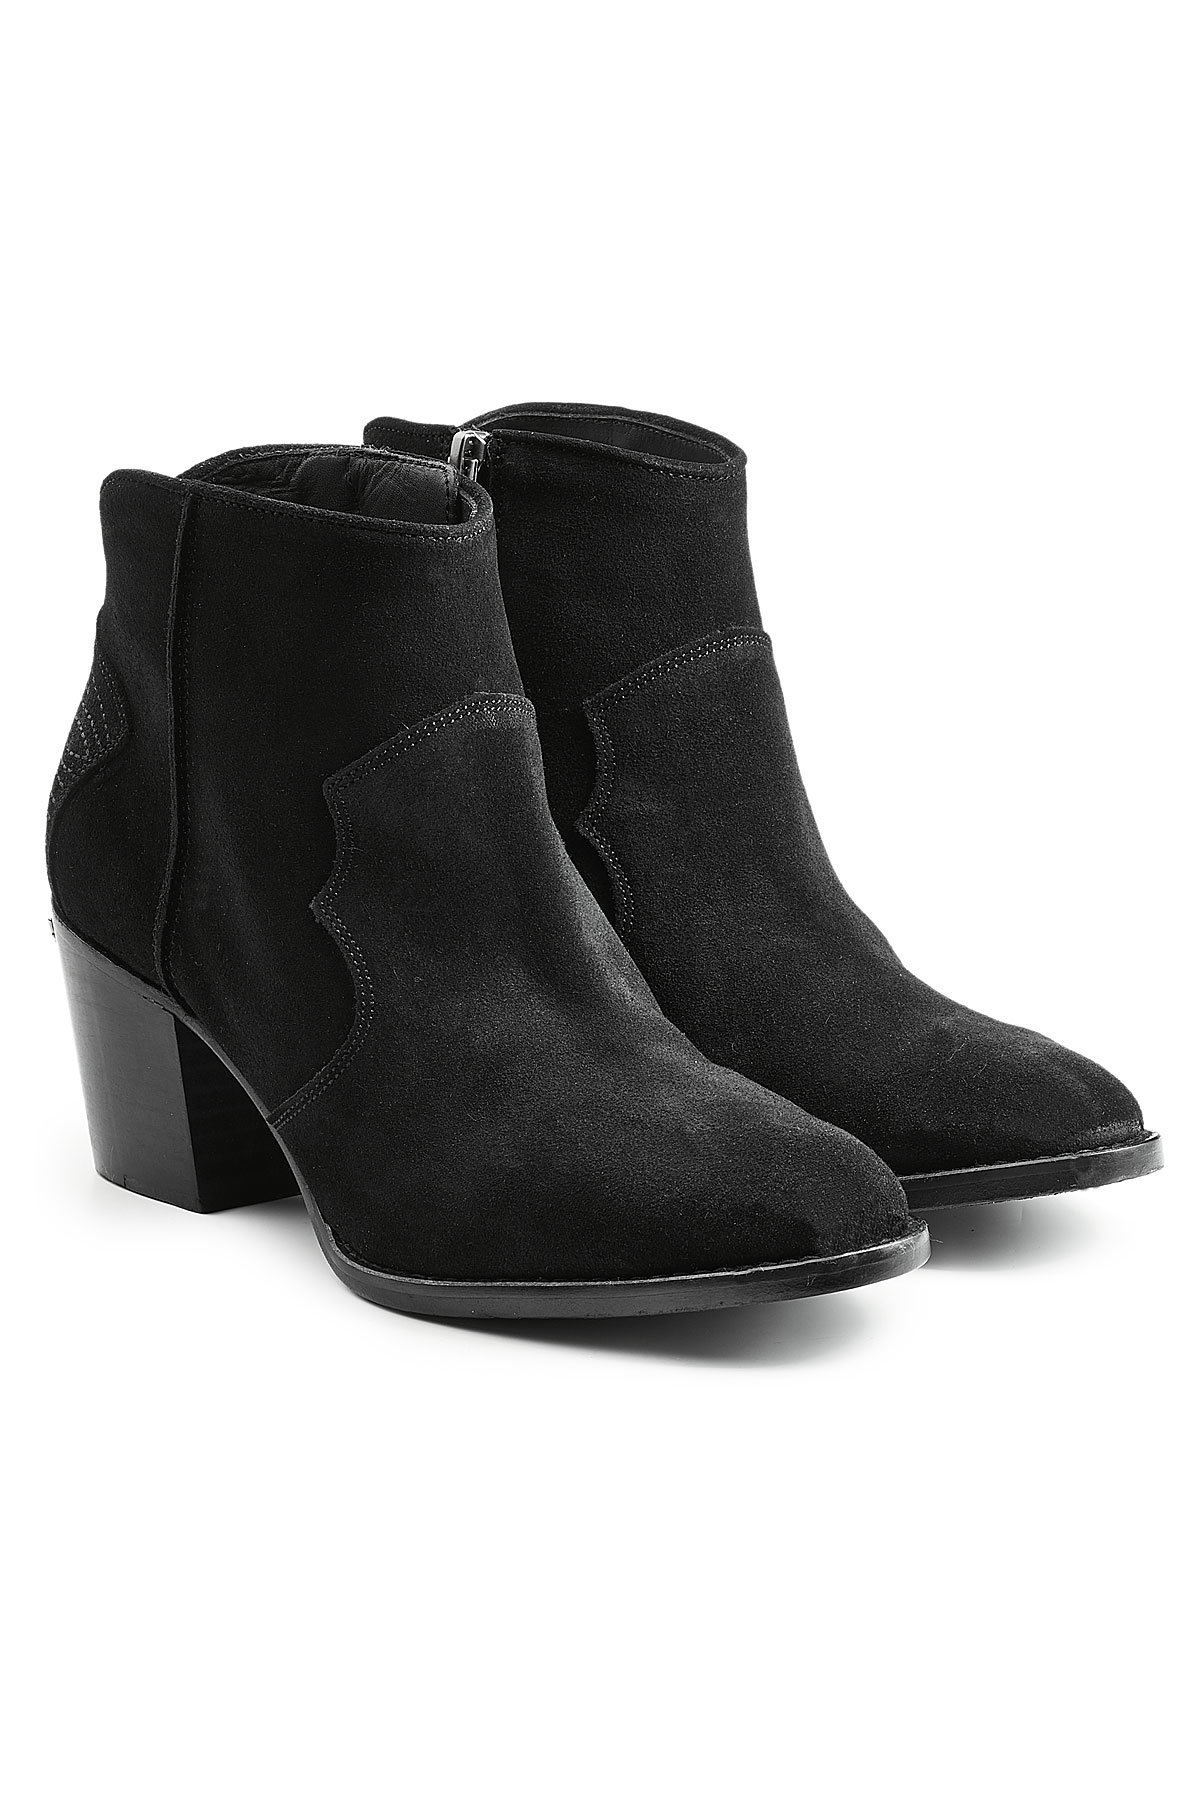 Zadig & Voltaire - Molly Suede Ankle Boots